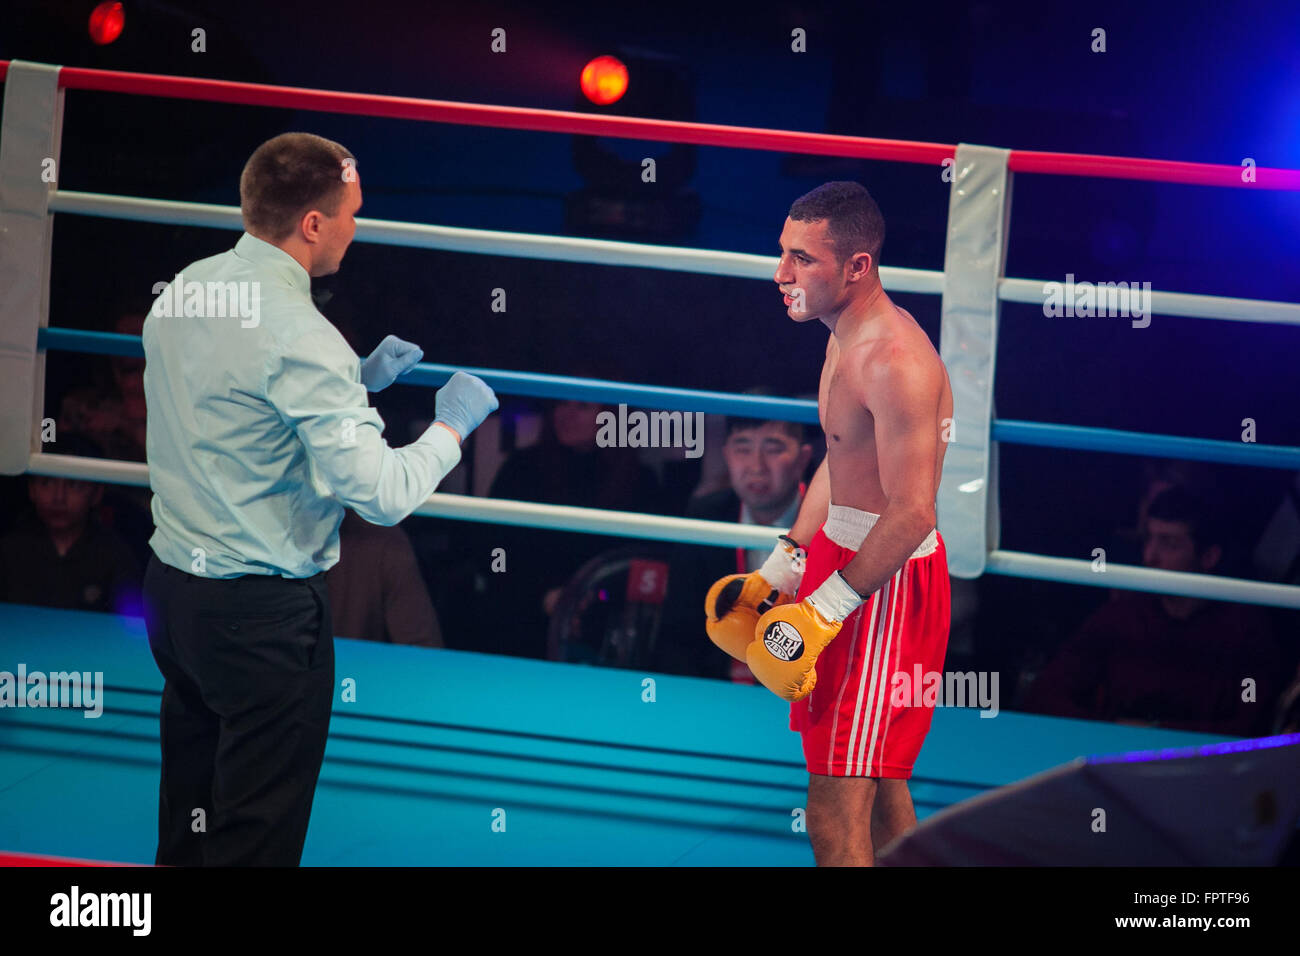 MOSCOW - 18 MARCH, 2016 : Professional boxing show Fight For The Future. Jheritz Chaves versus Vage Sarukhanyan (won) fought for the WBC EPBC (Eurasia Pacific Boxing Council) Championship promoted by Punch Boxing Promotions. Boxers Uriy Trogiyanov, Manvel Sargsyan, Jora Amazaryan, Ayk Shakhnazaryan also fought on the ring. Stock Photo